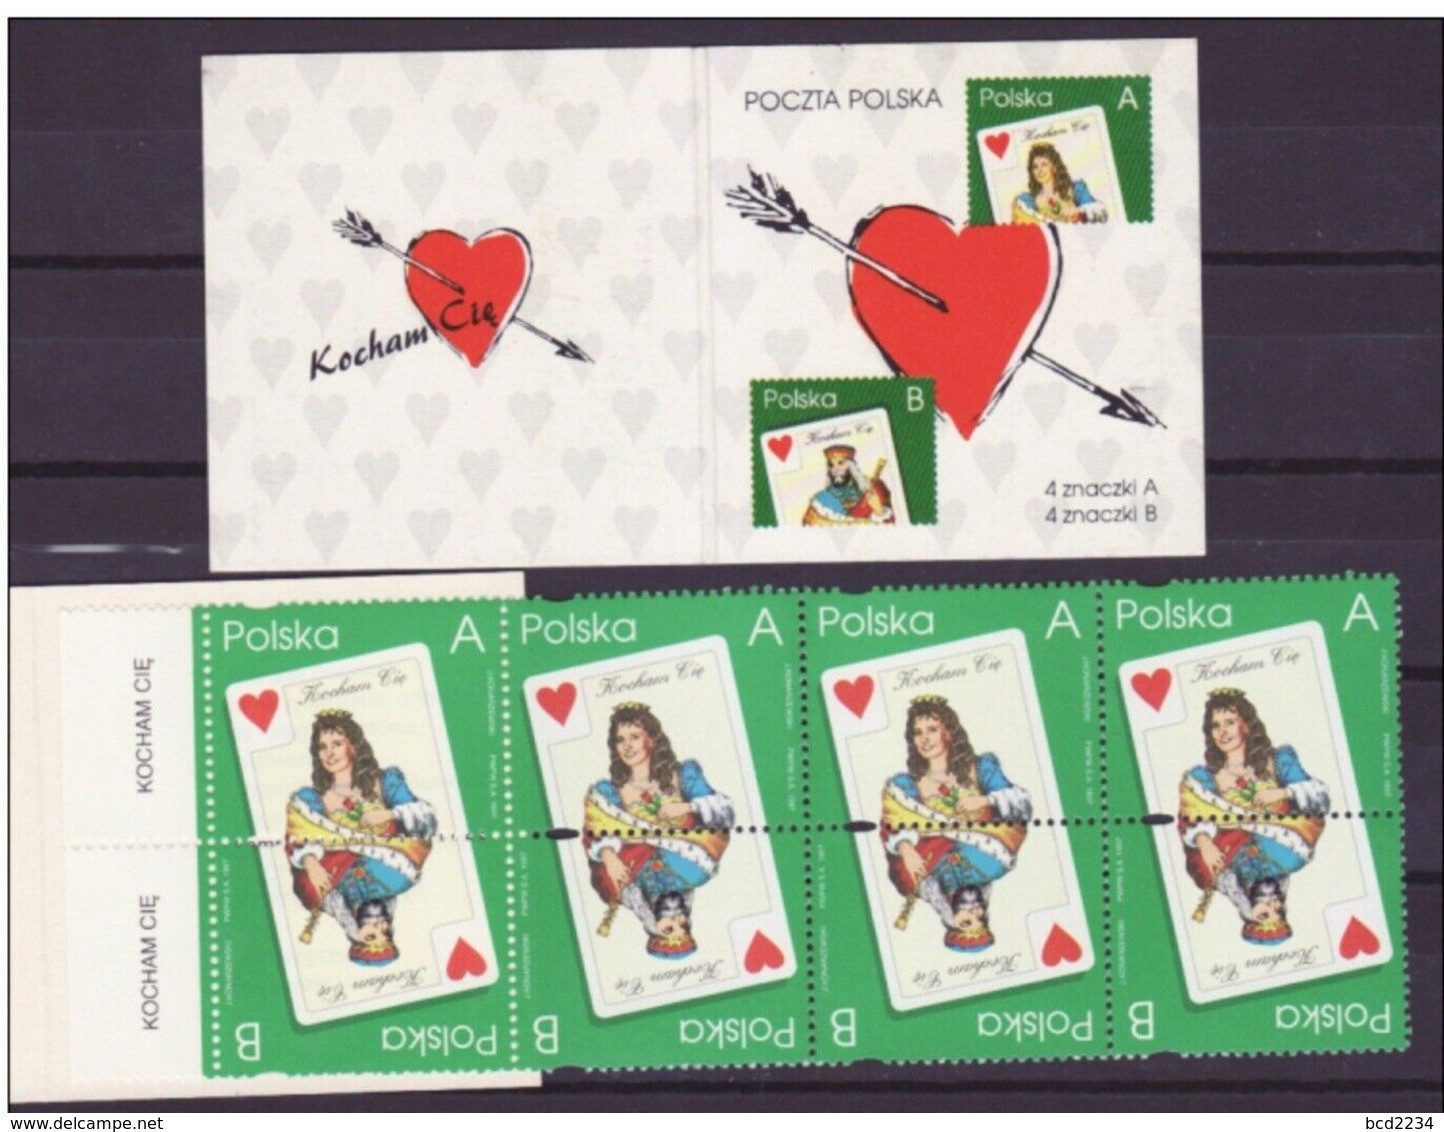 POLAND 1997 KOCHAM CIE I LOVE YOU BOOKLET COMPLETE VALENTINES DAY Mi No 3634-35 MNH Fi 10 Heart Cupid Playing Card Queen - Cuadernillos